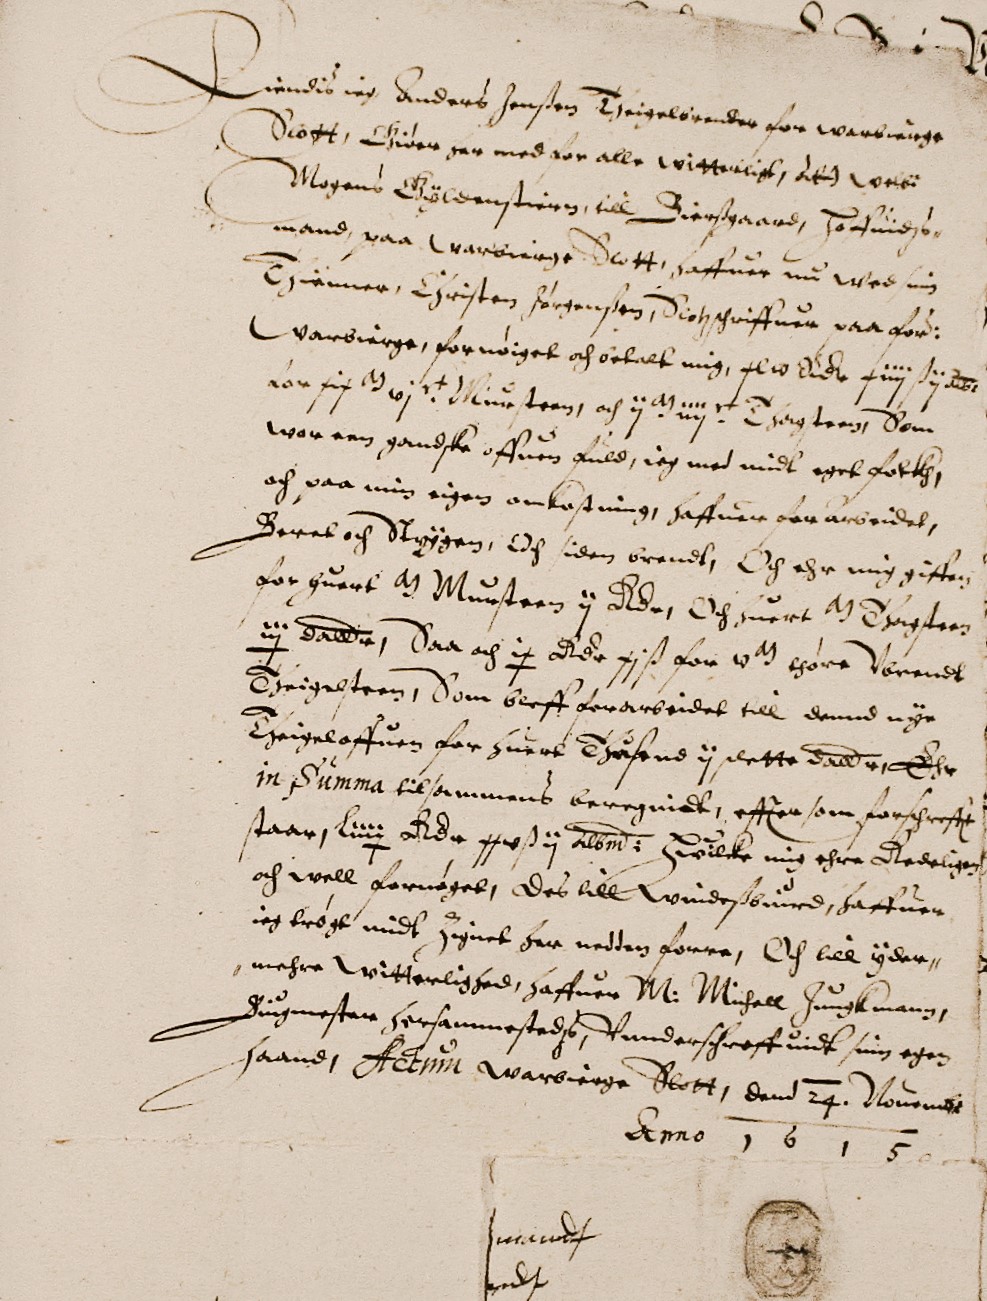 On this receipt from 24 November 1615, Anders the brickmaker has applied his seal at the bottom and in this way signed that he received payment for 19,600 wall bricks and 2,400 tile bricks “… which I with my own staff and at my own expense have produced, carried, formed and then fired”. The original document is in the Danish National Archives in Copenhagen